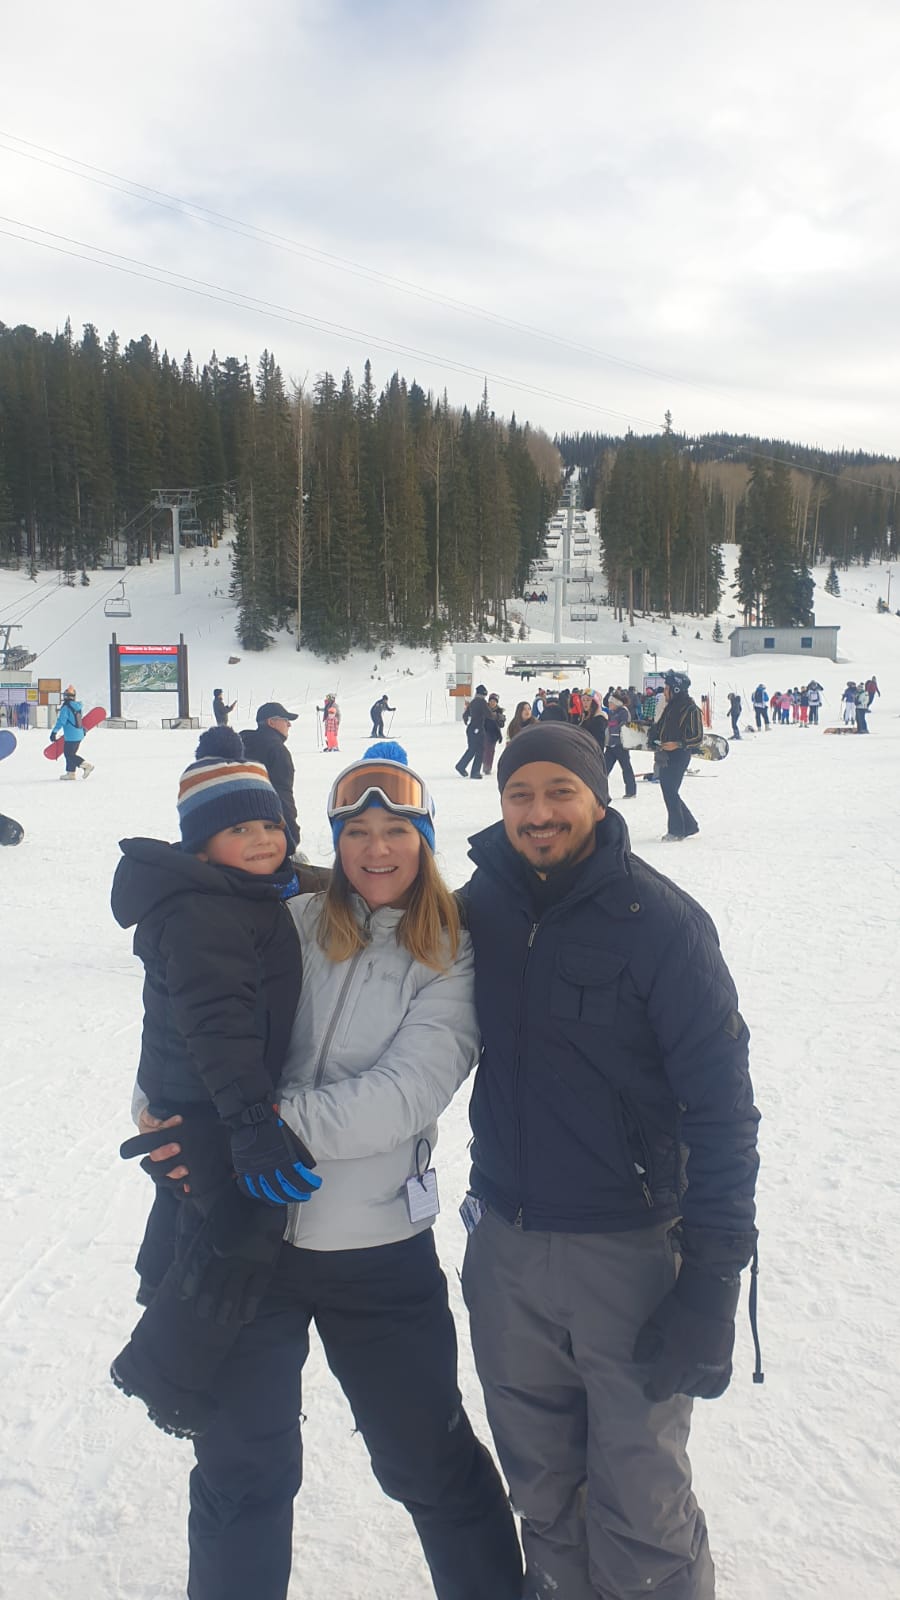 bloomin blinds chandler gilbert owner and family on ski trip